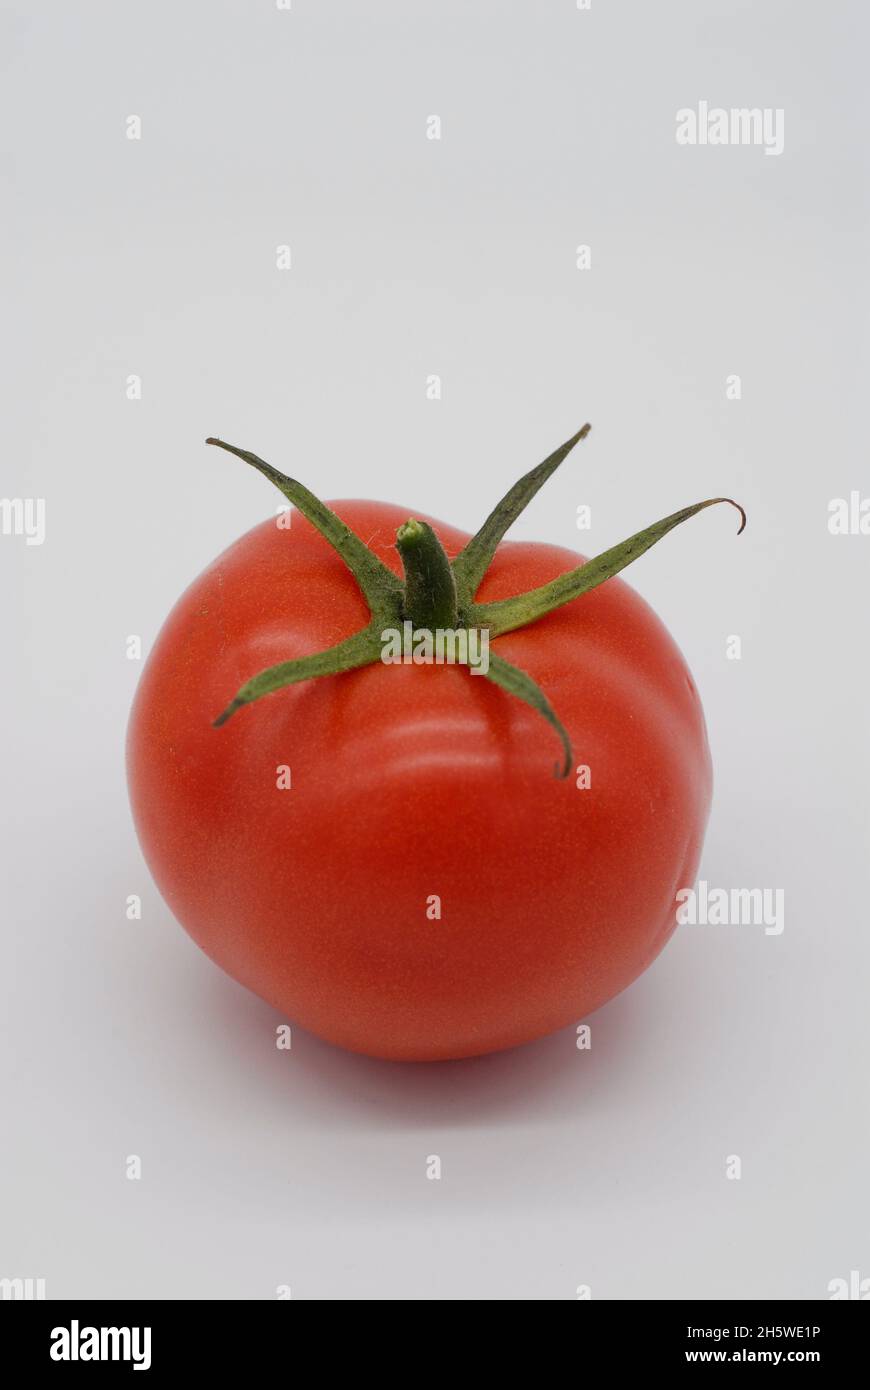 red healthy tomato with stem Stock Photo